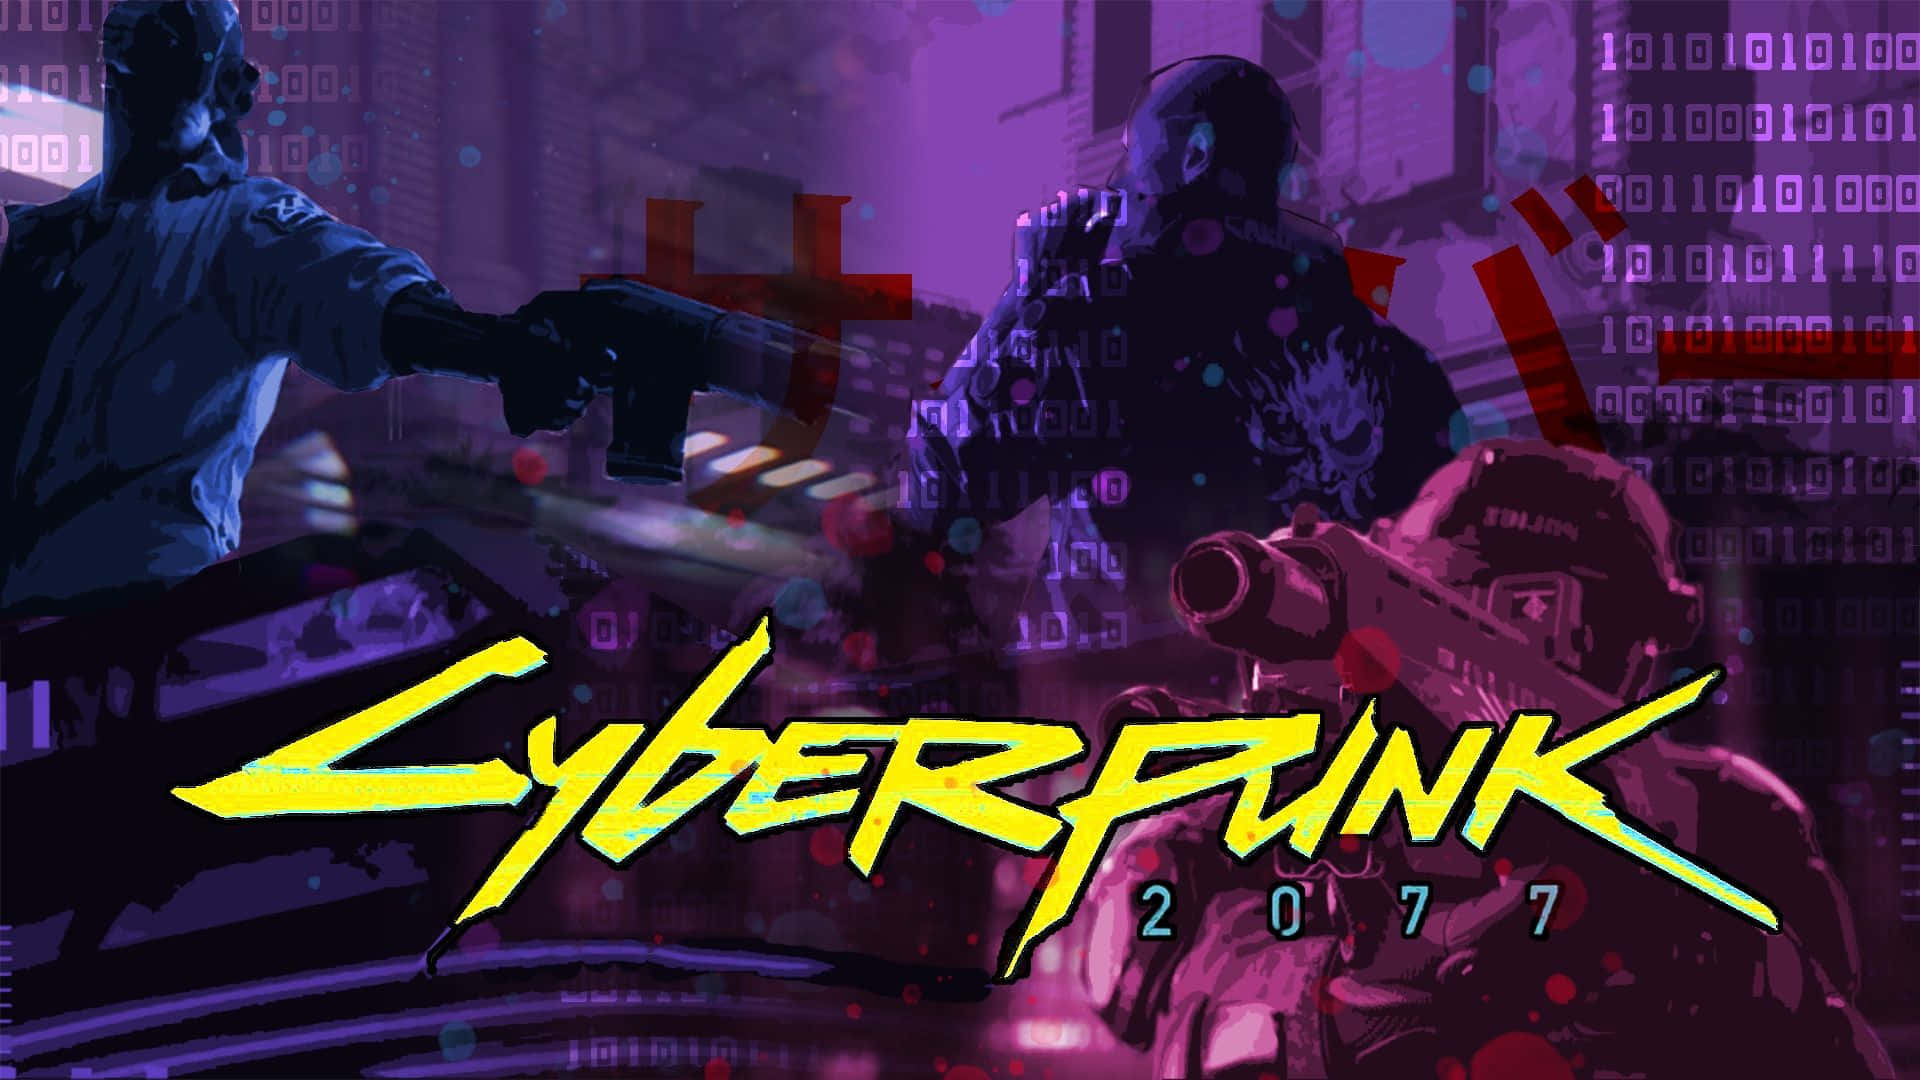 Dive into a high-tech dystopian world with Cyberpunk 2077